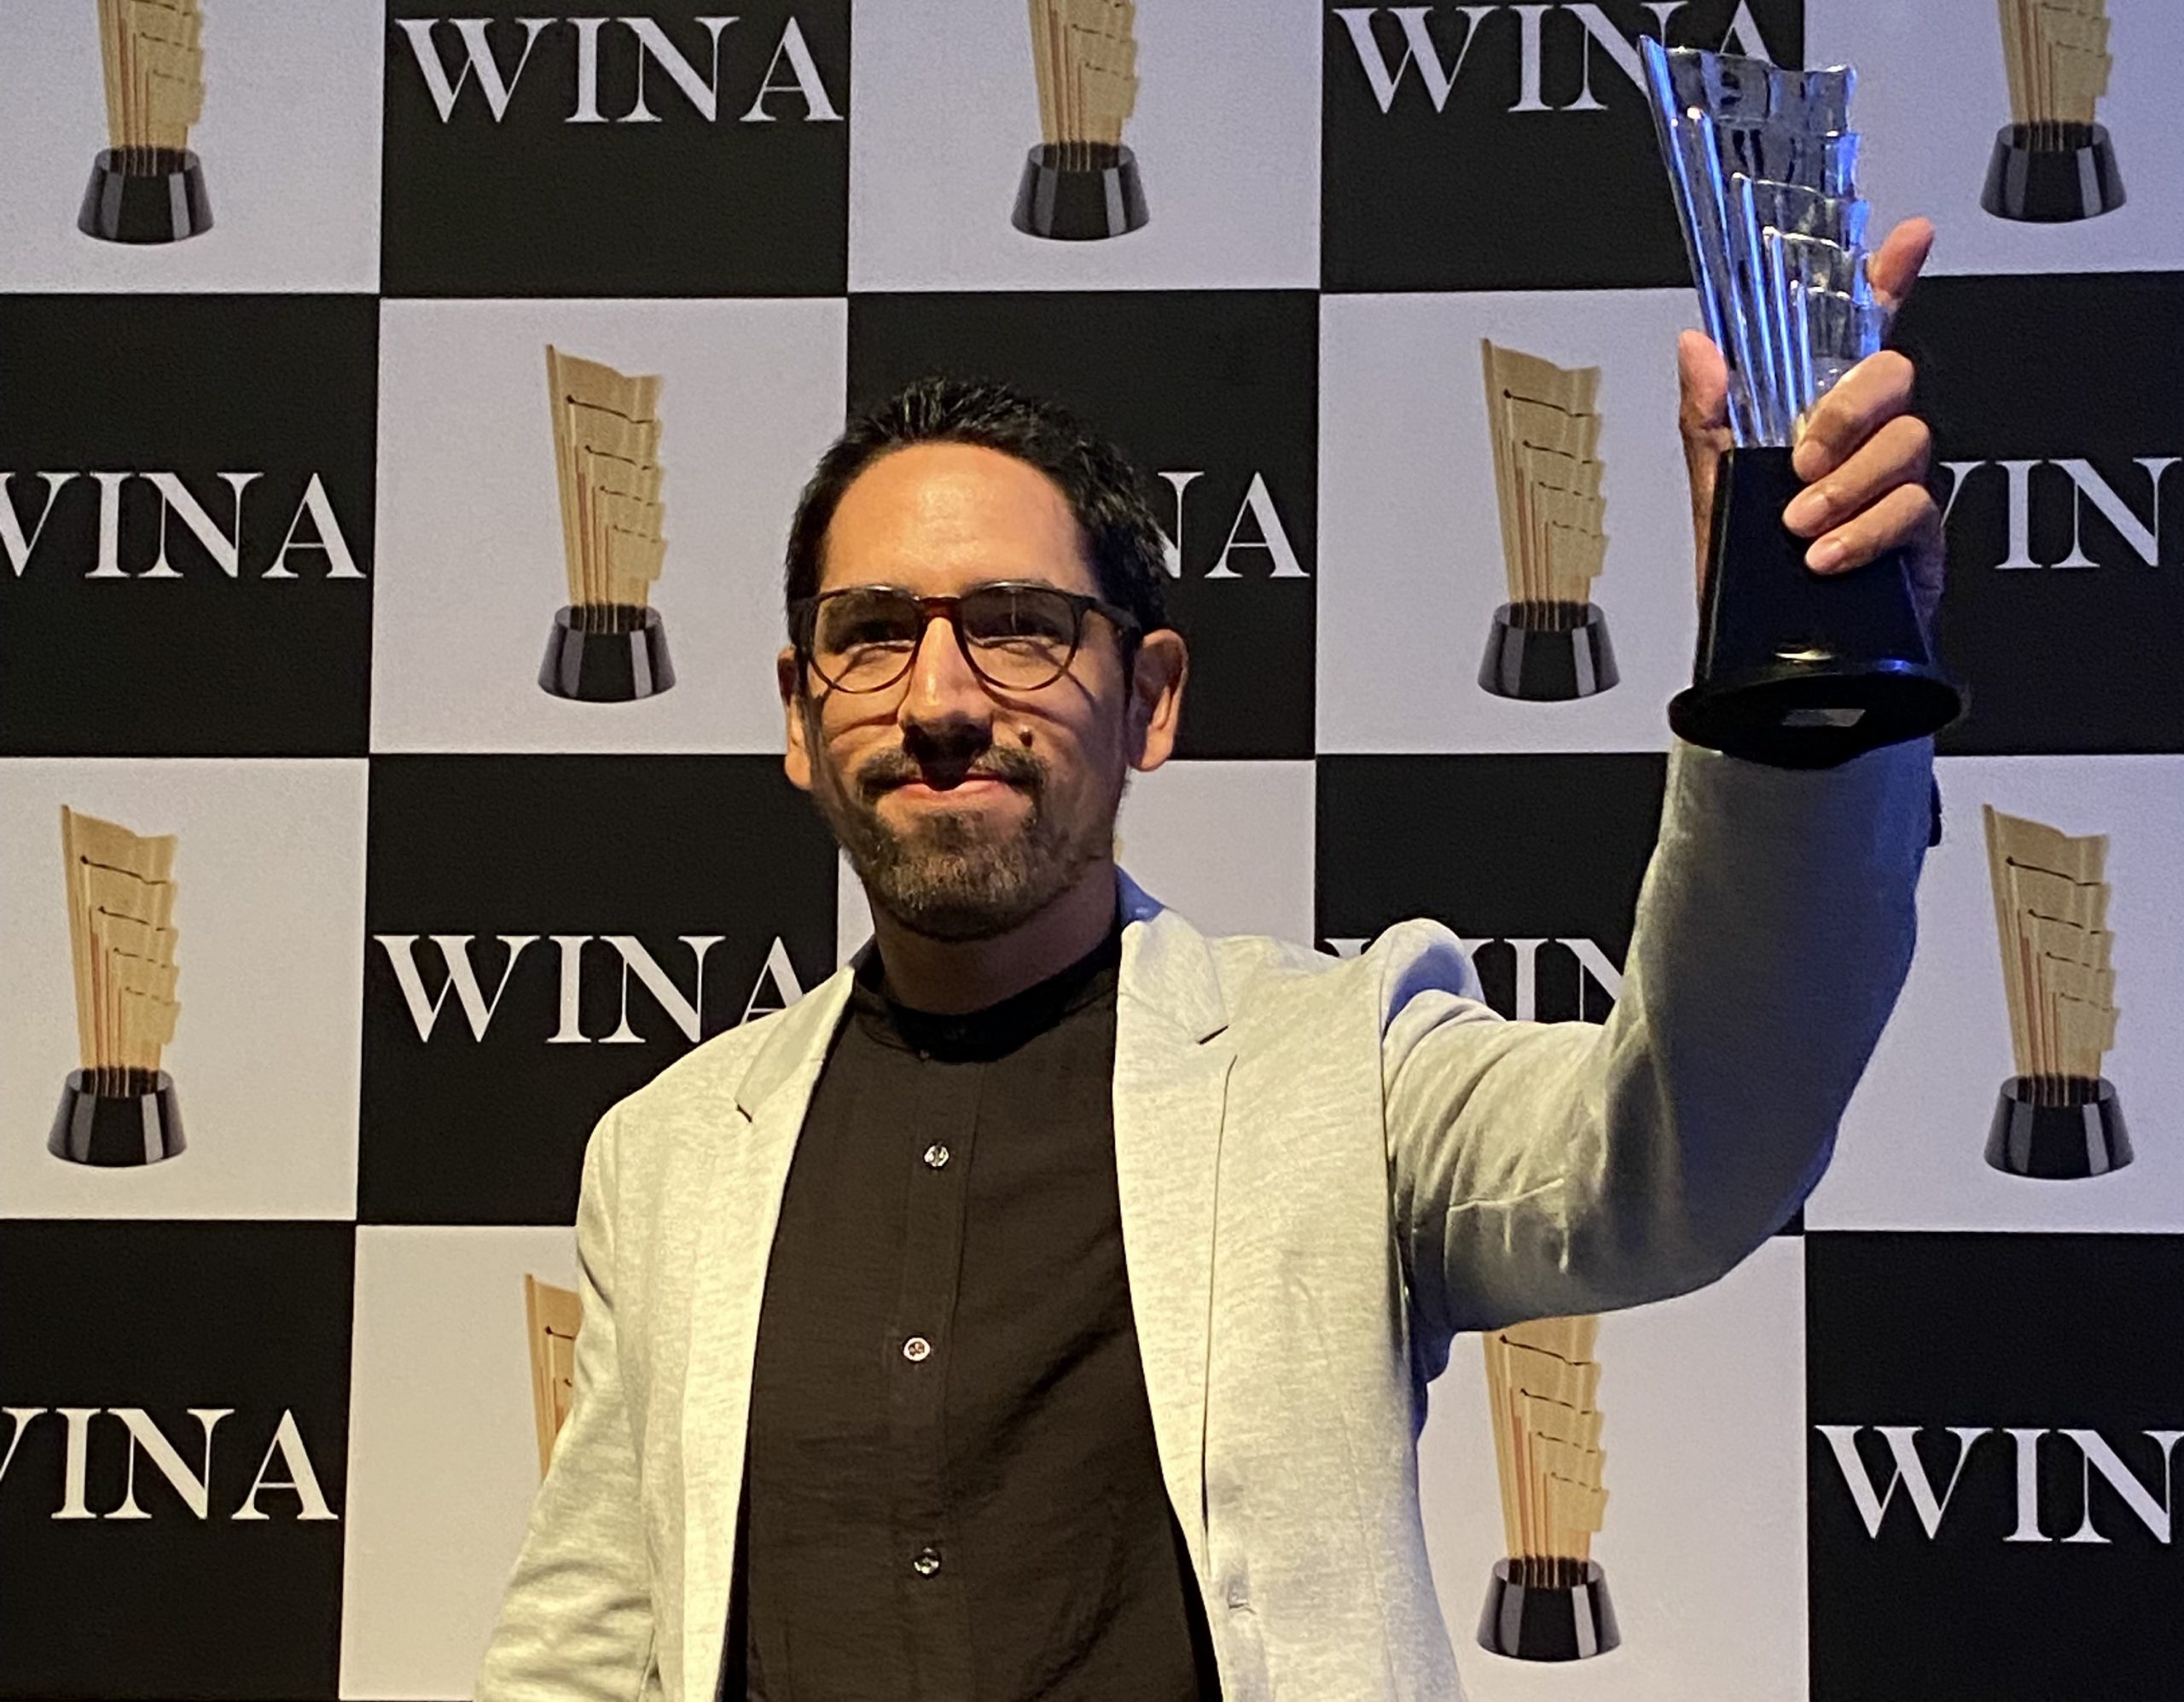 In Dubai, WINA presented awards to the best independent agencies at the 2022 edition